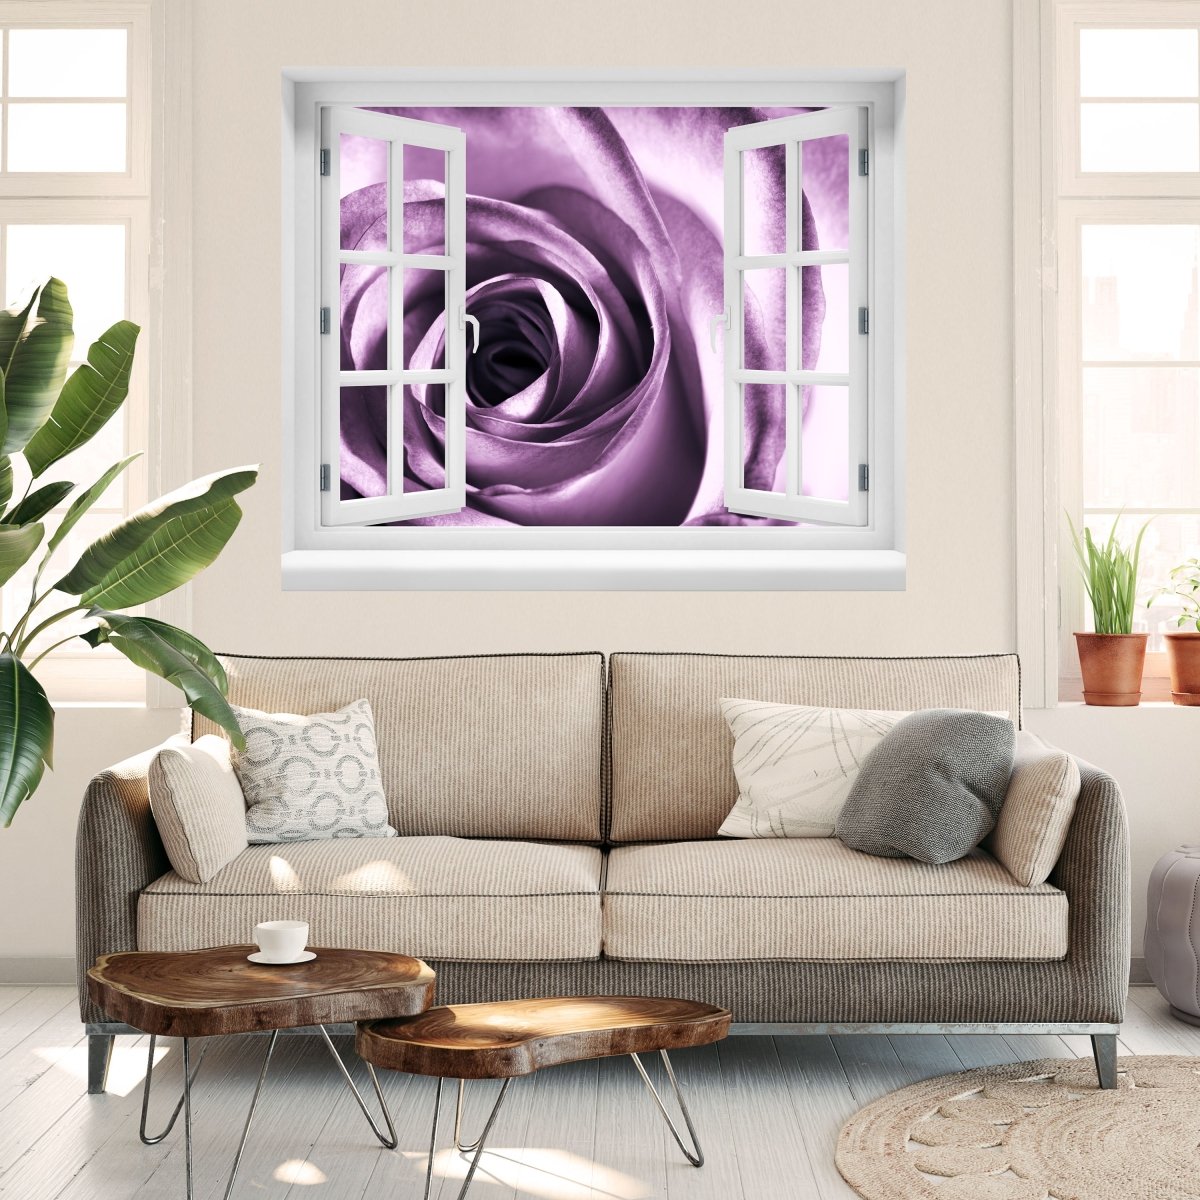 Sticker mural 3D rose violette - Wall Decal M0051